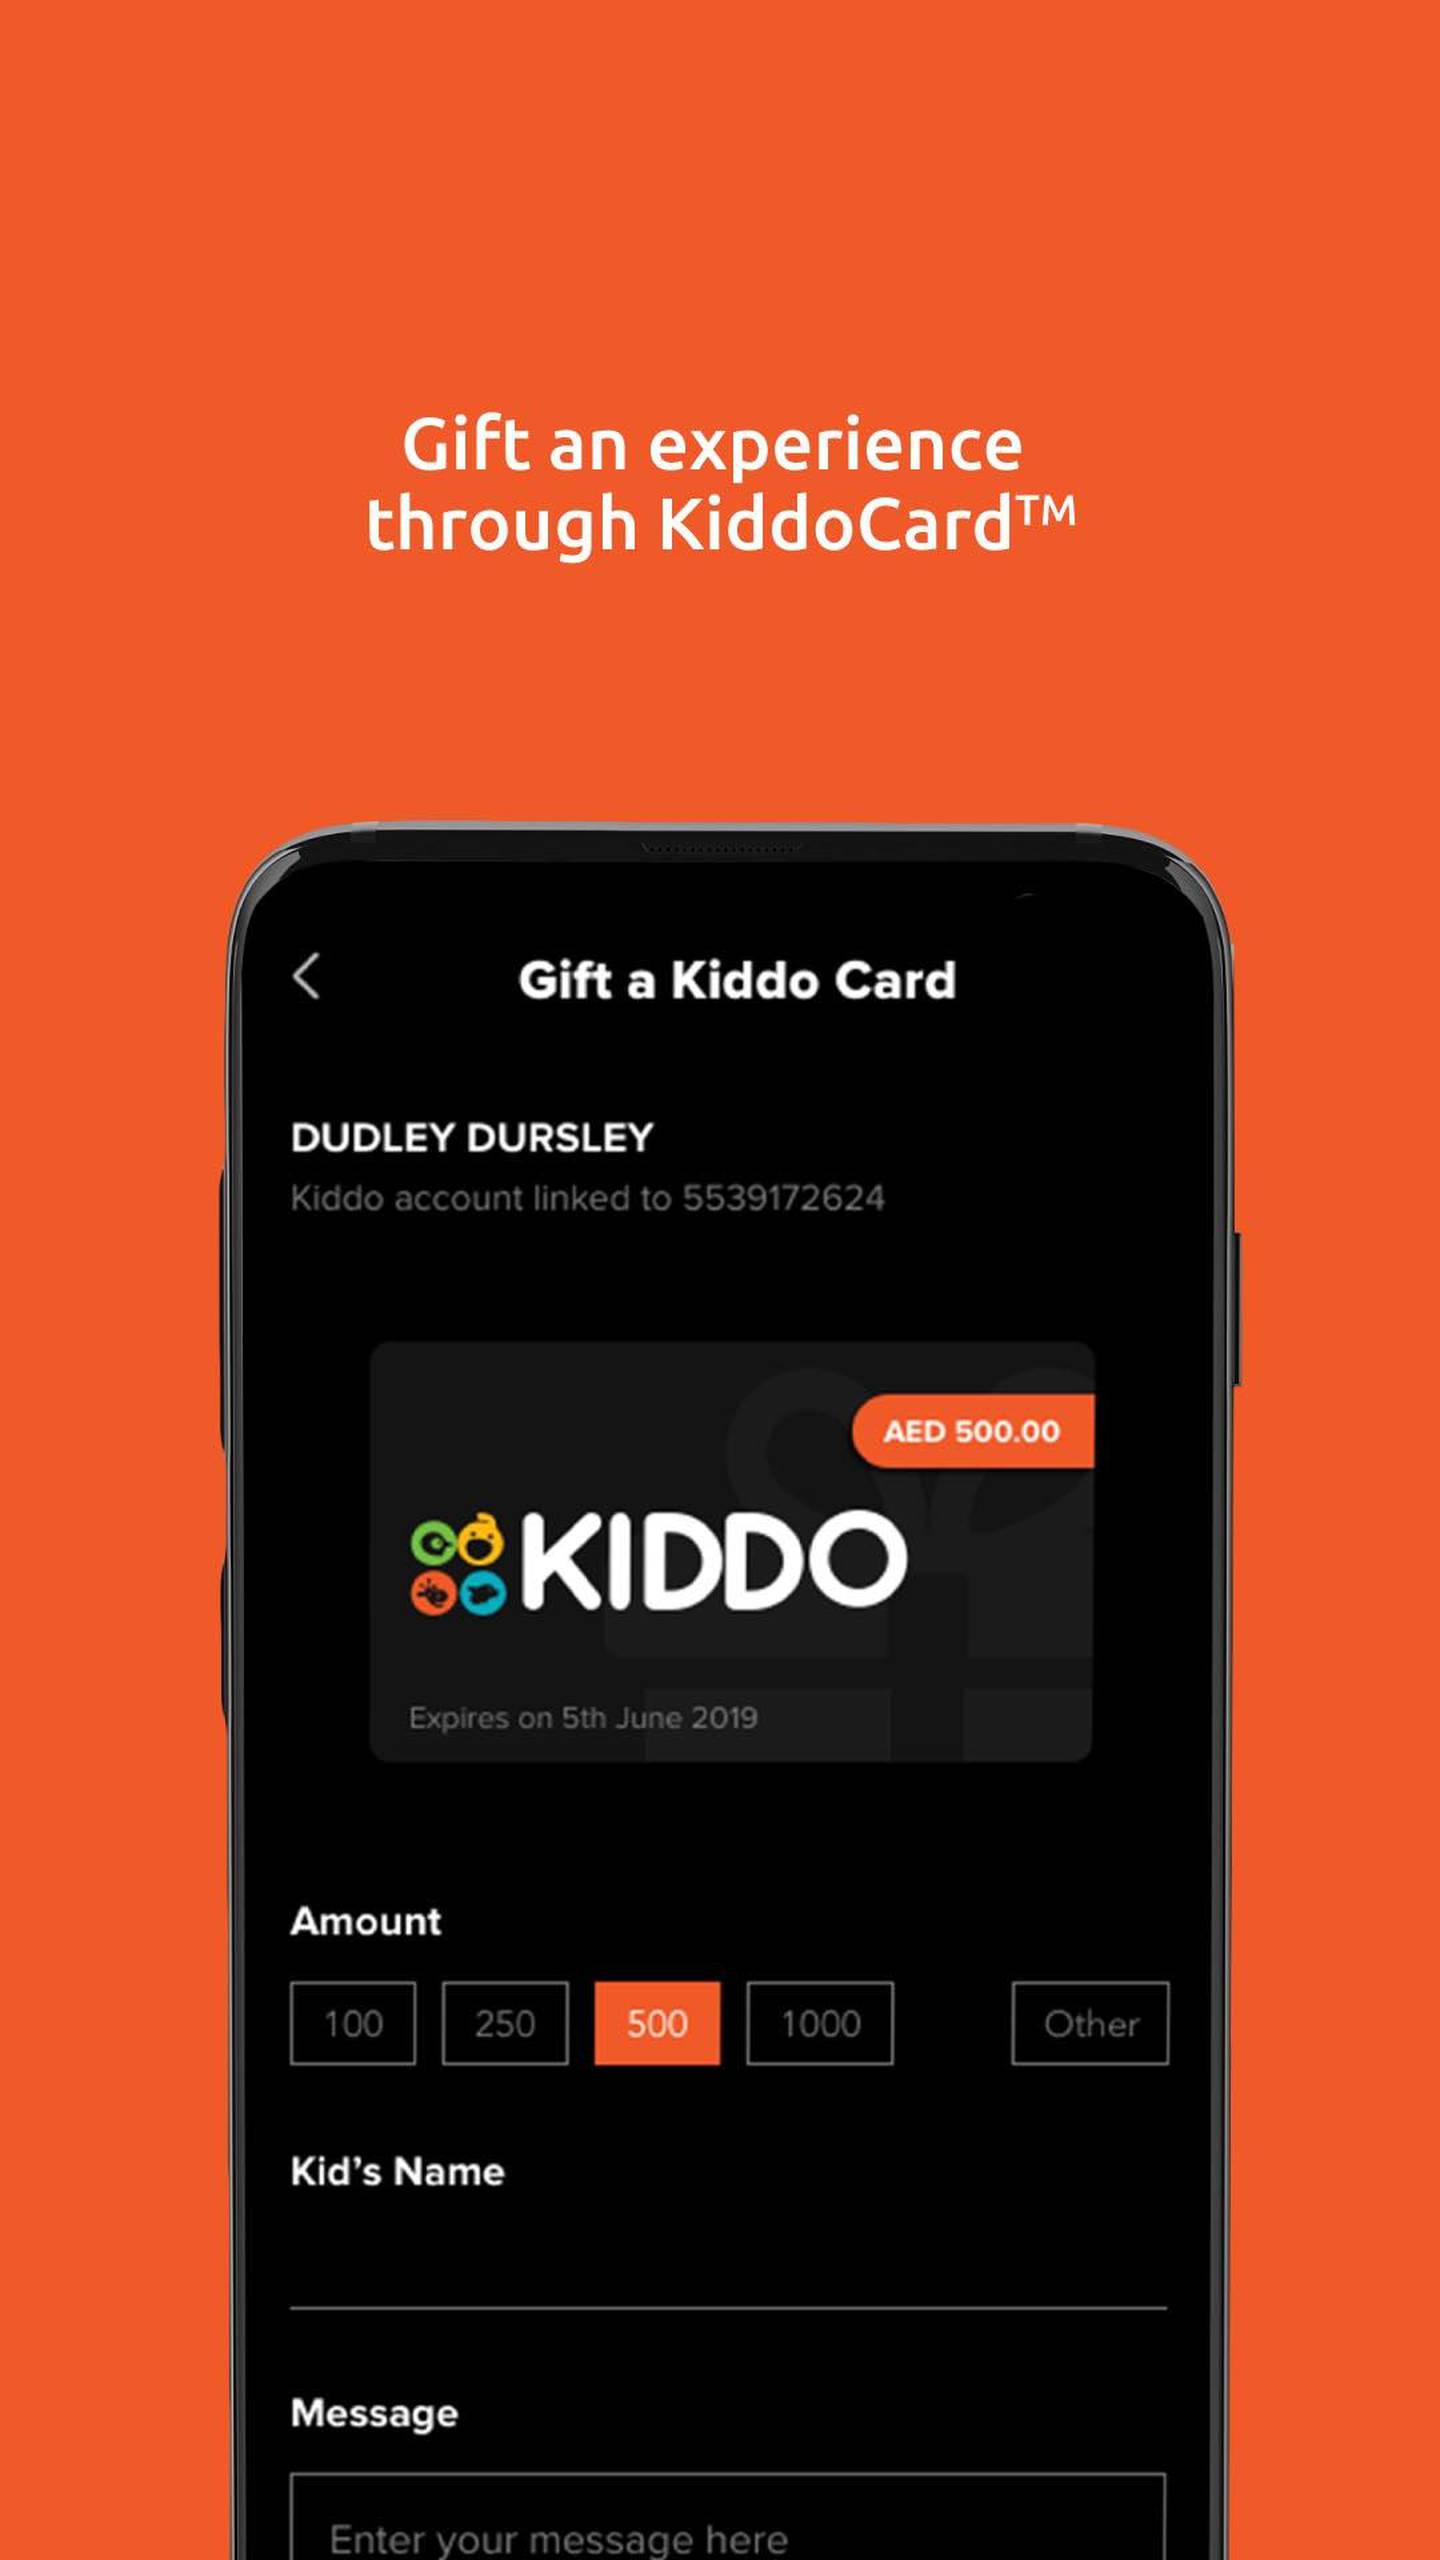 The Kiddo app allows you to find and book children's activities in the UAE